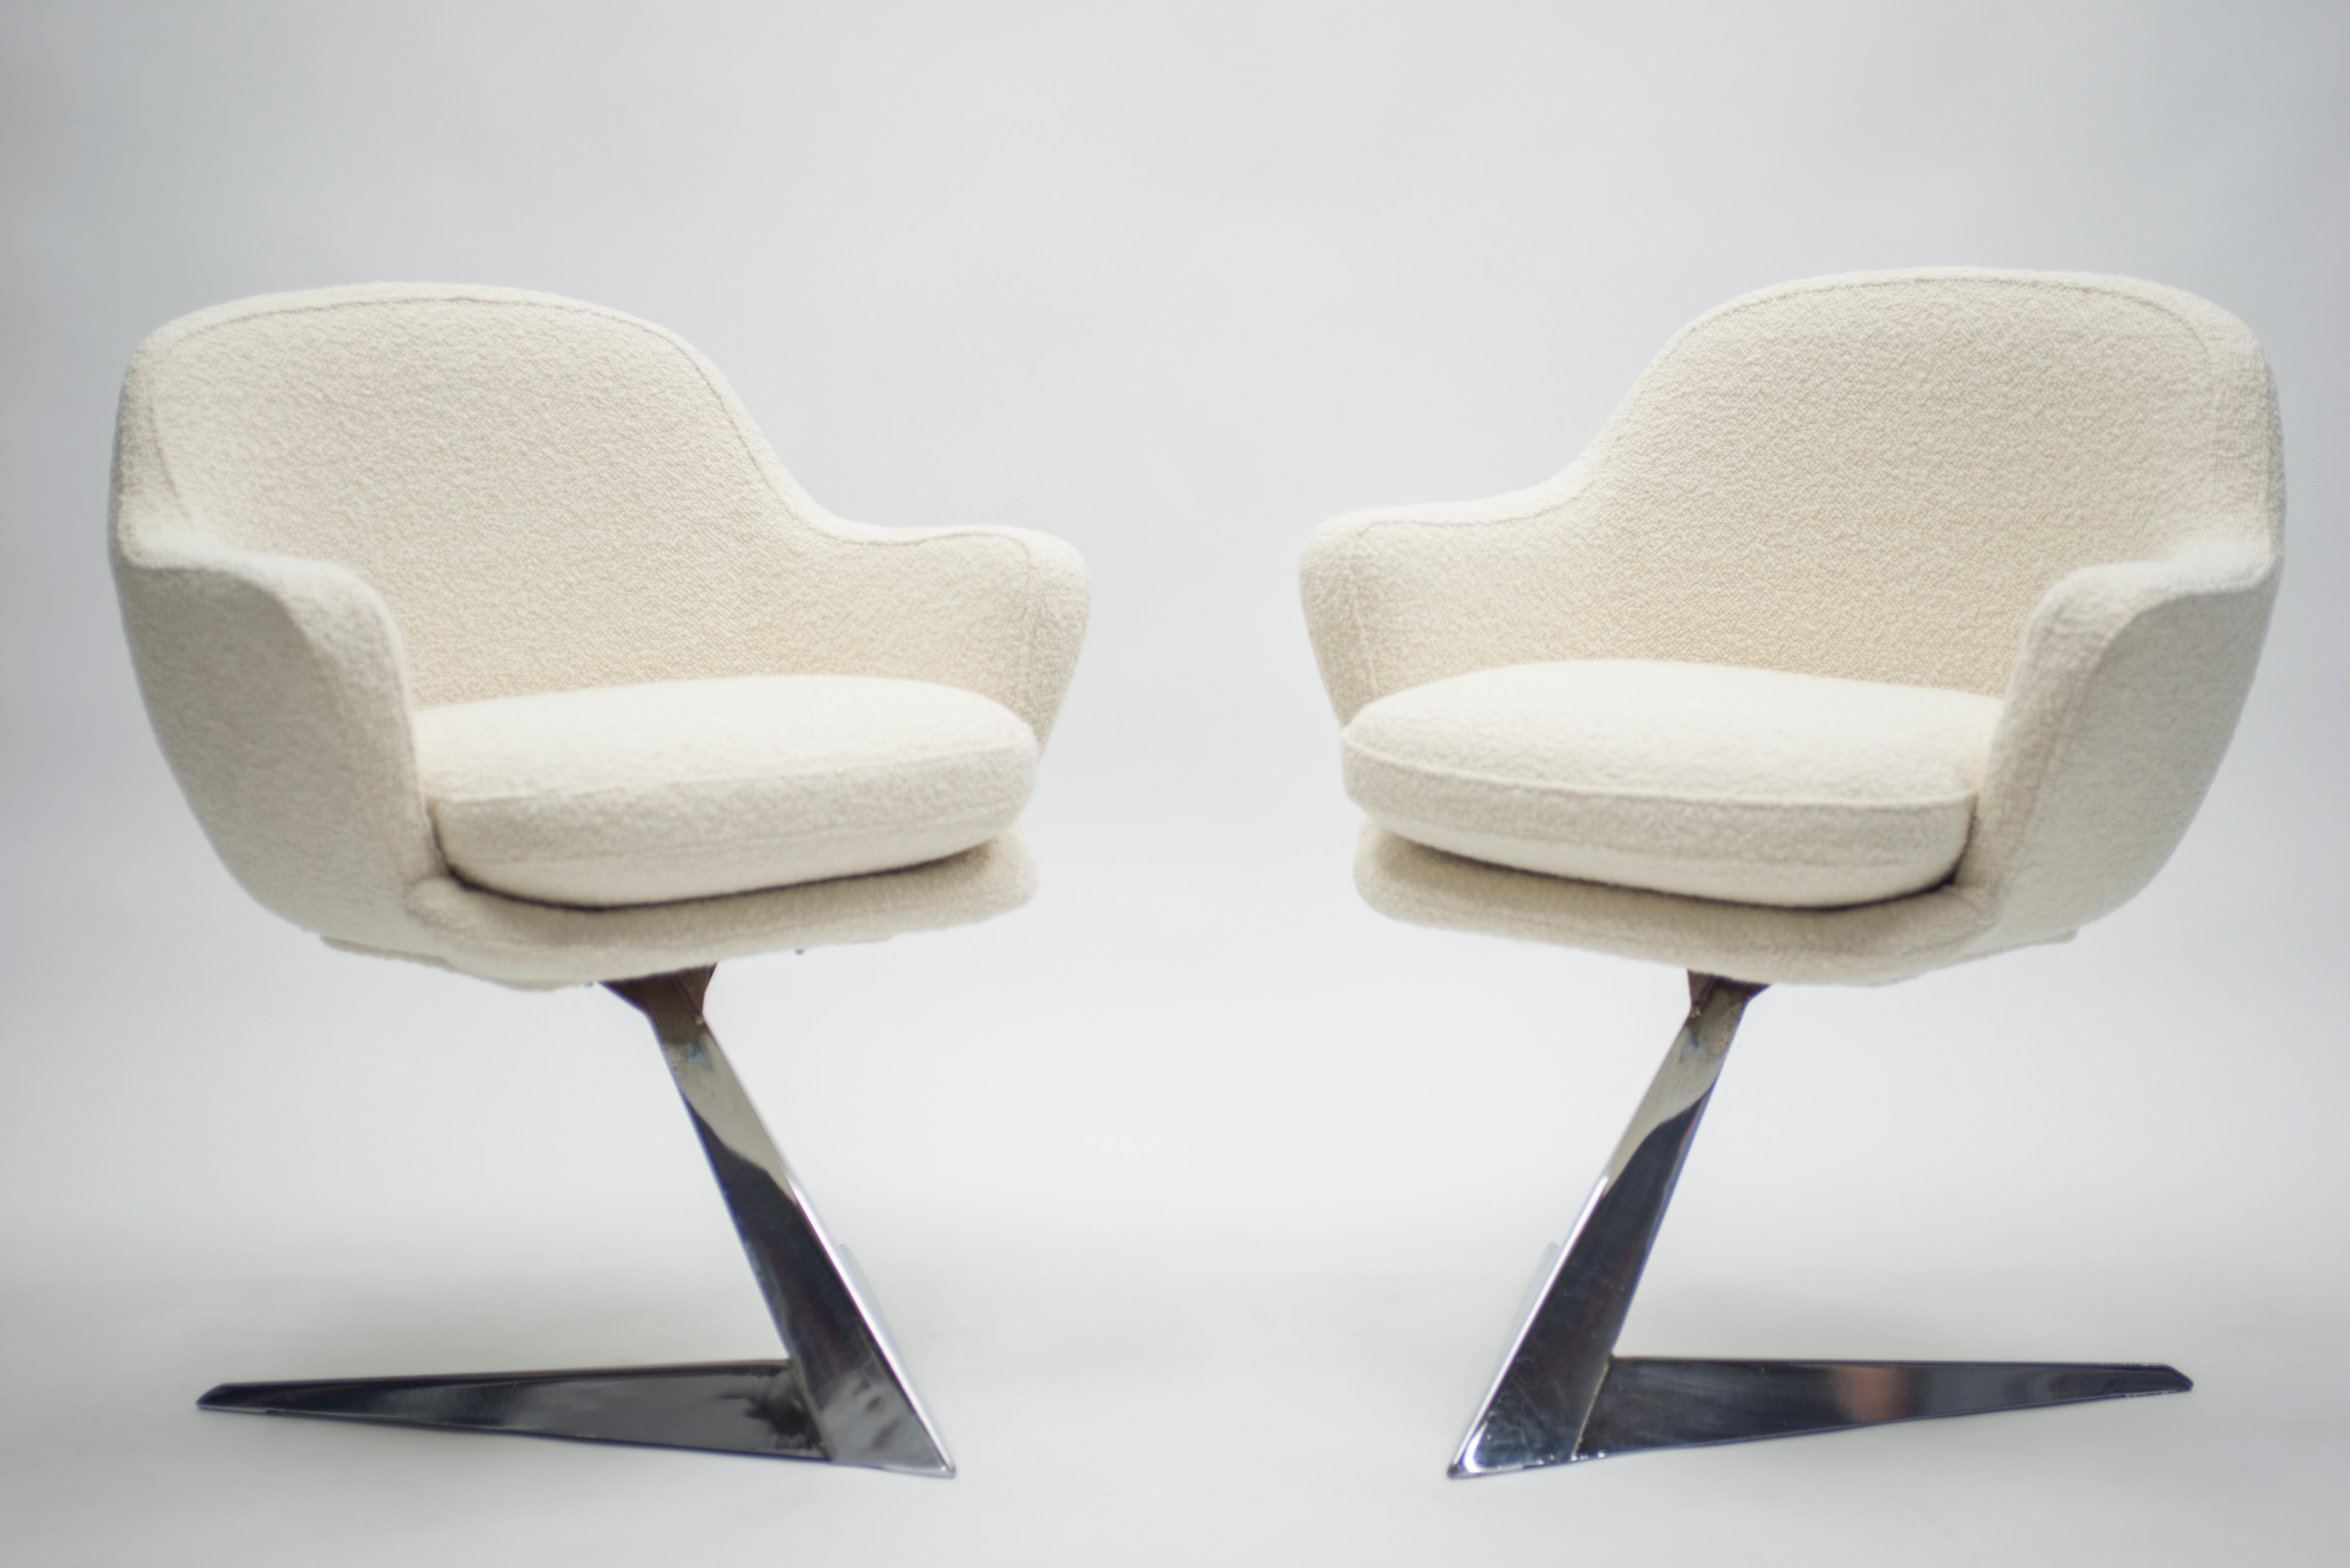 If the distinctive aerodynamic, triangular base in this pair of midcentury armchairs feels familiar, it may be because it potentially inspired the iconic Concorde passenger airliner—one of only a couple of supersonic aircrafts that ever flew